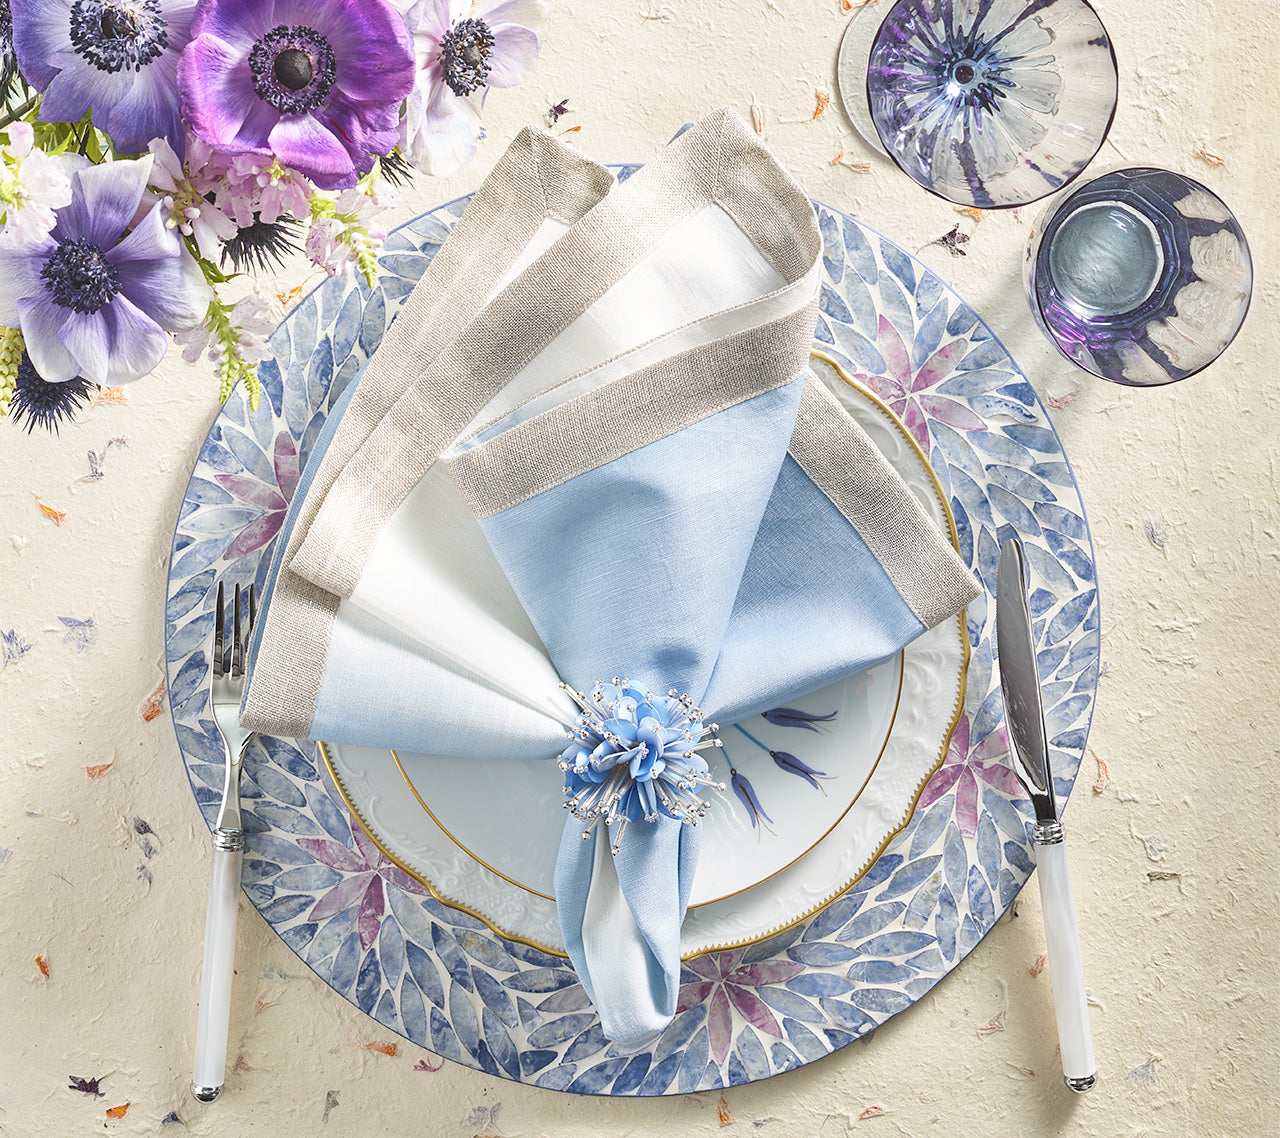 Flora Placemat in Lilac & Periwinkle, Set of 4